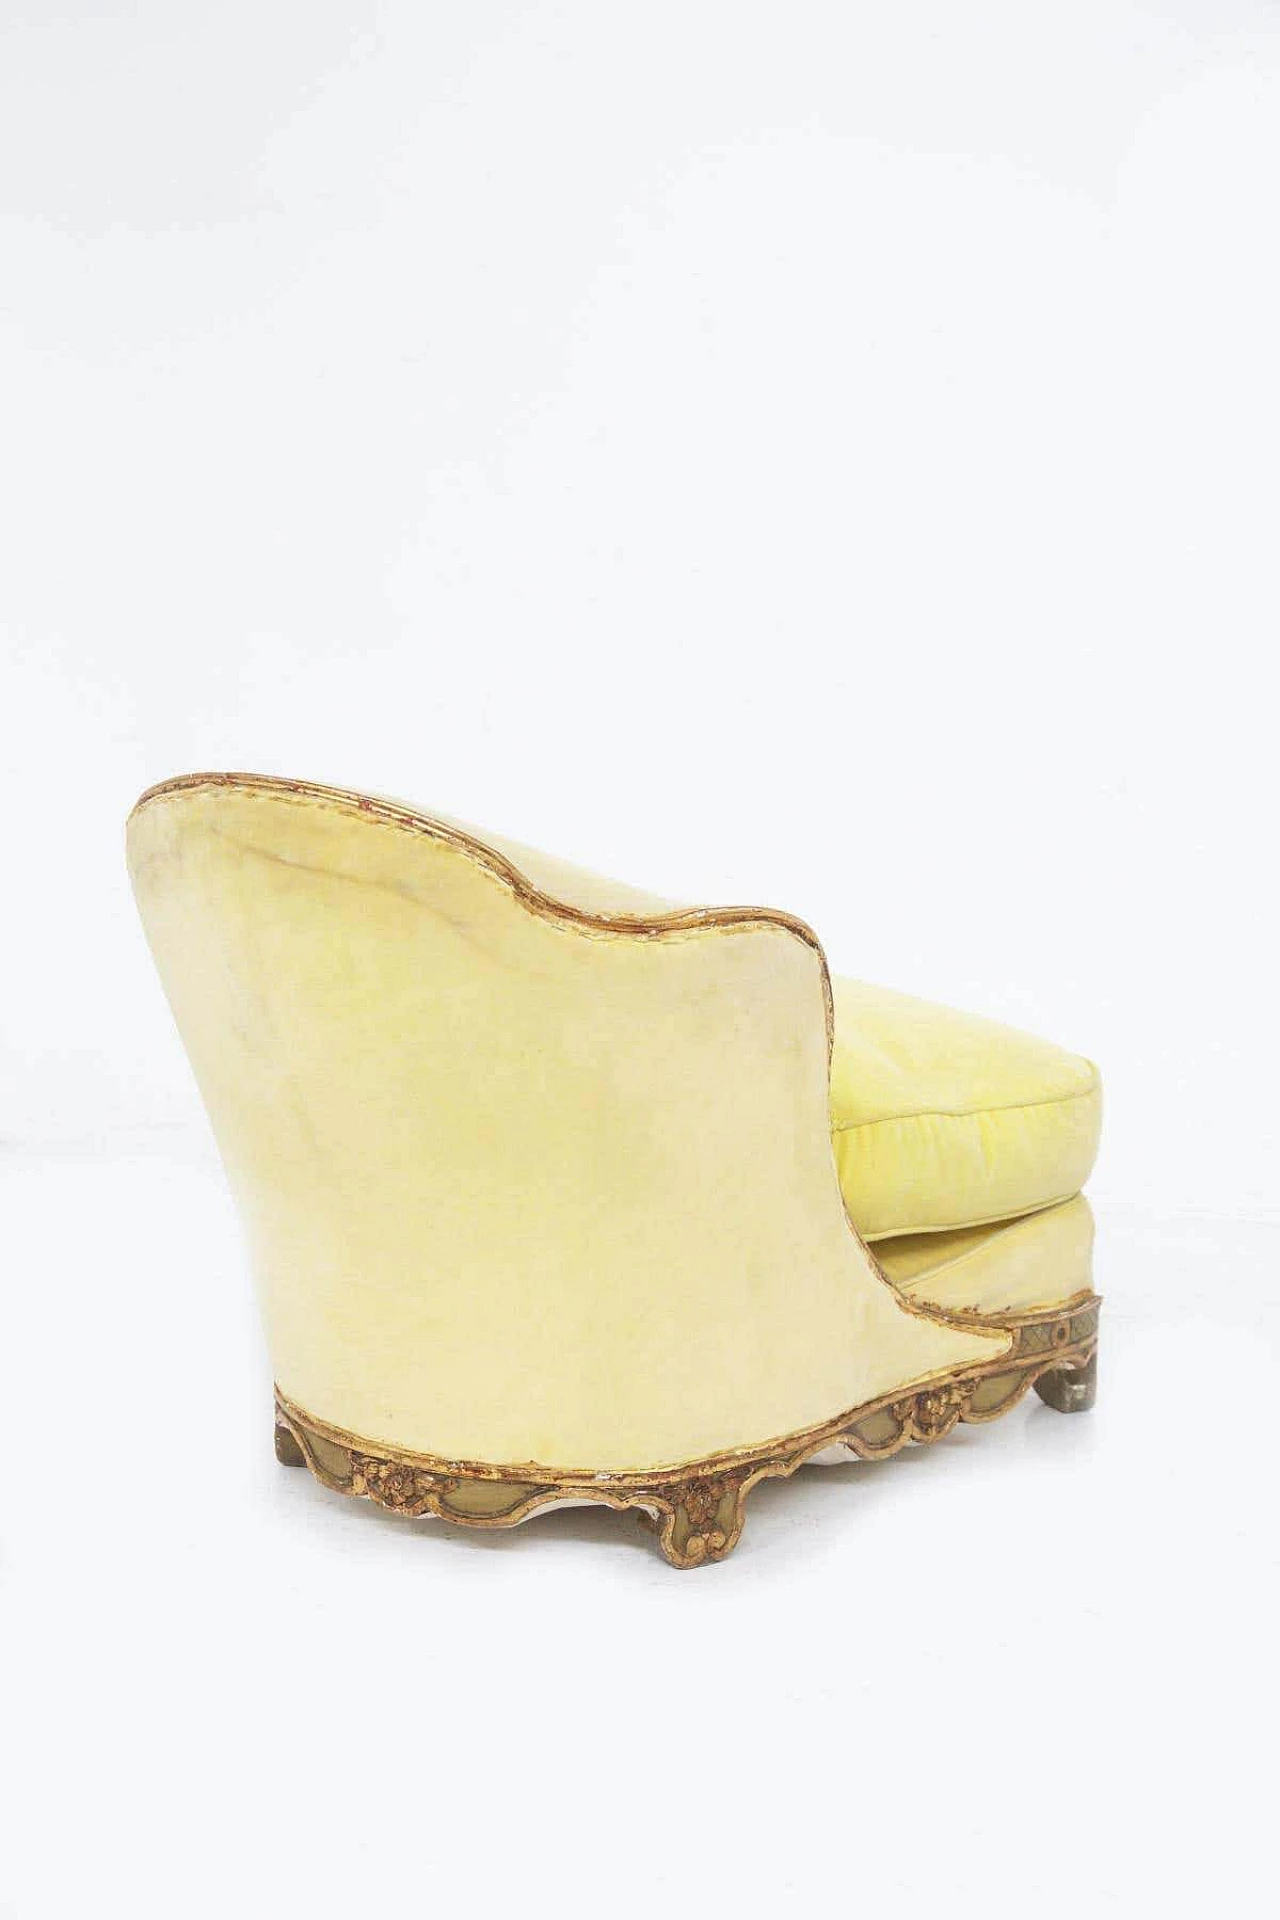 Baroque-style armchair in gilded wood and yellow velvet, 19th century 12